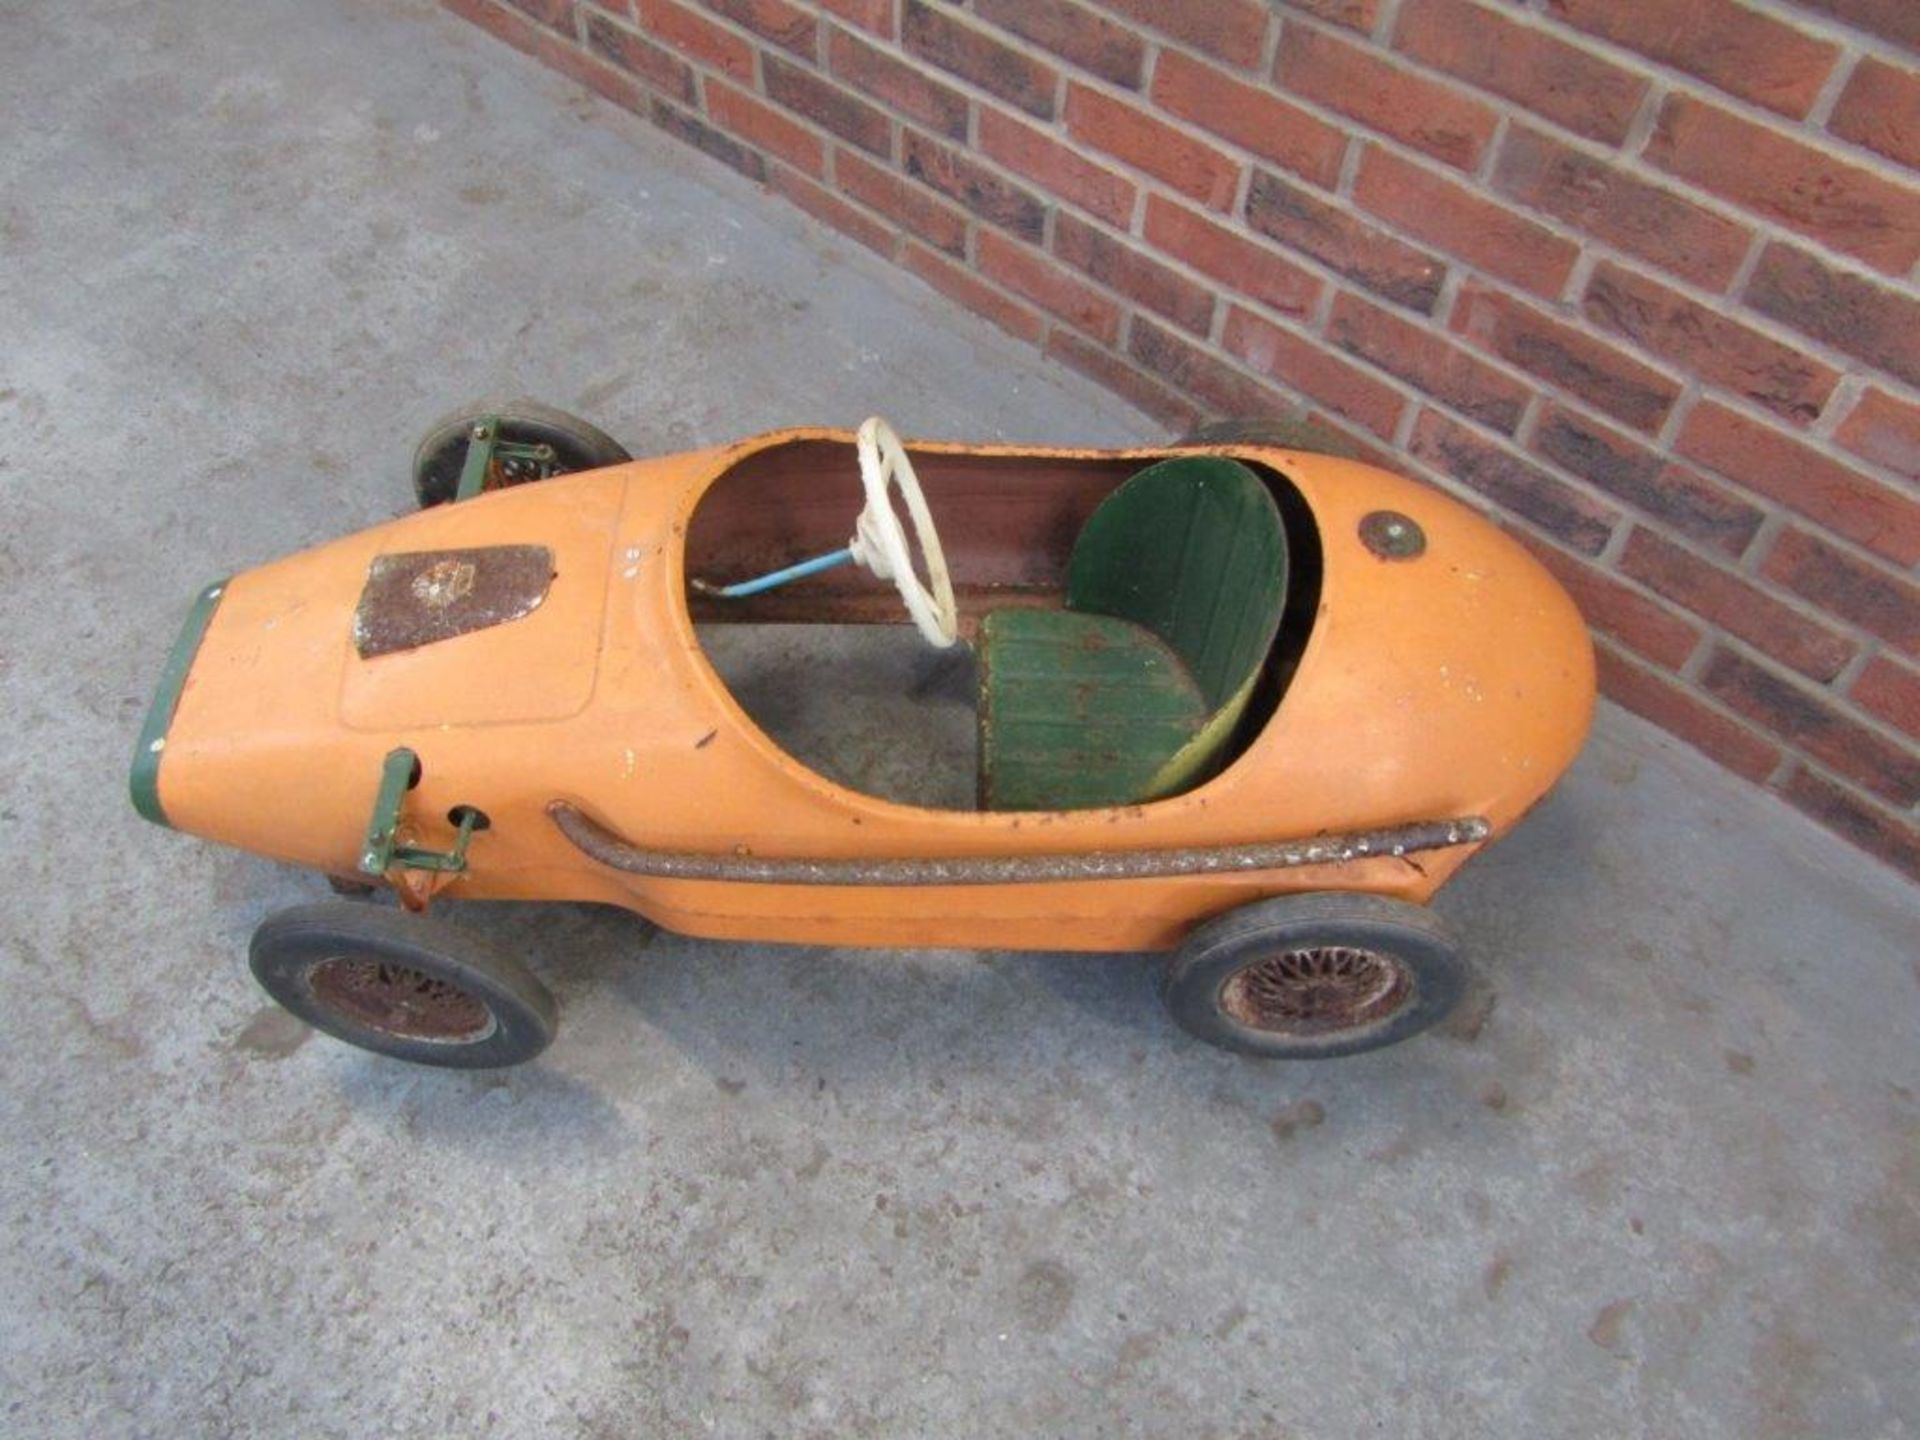 Vintage Triang Childs Racing Pedal Car - Image 3 of 5